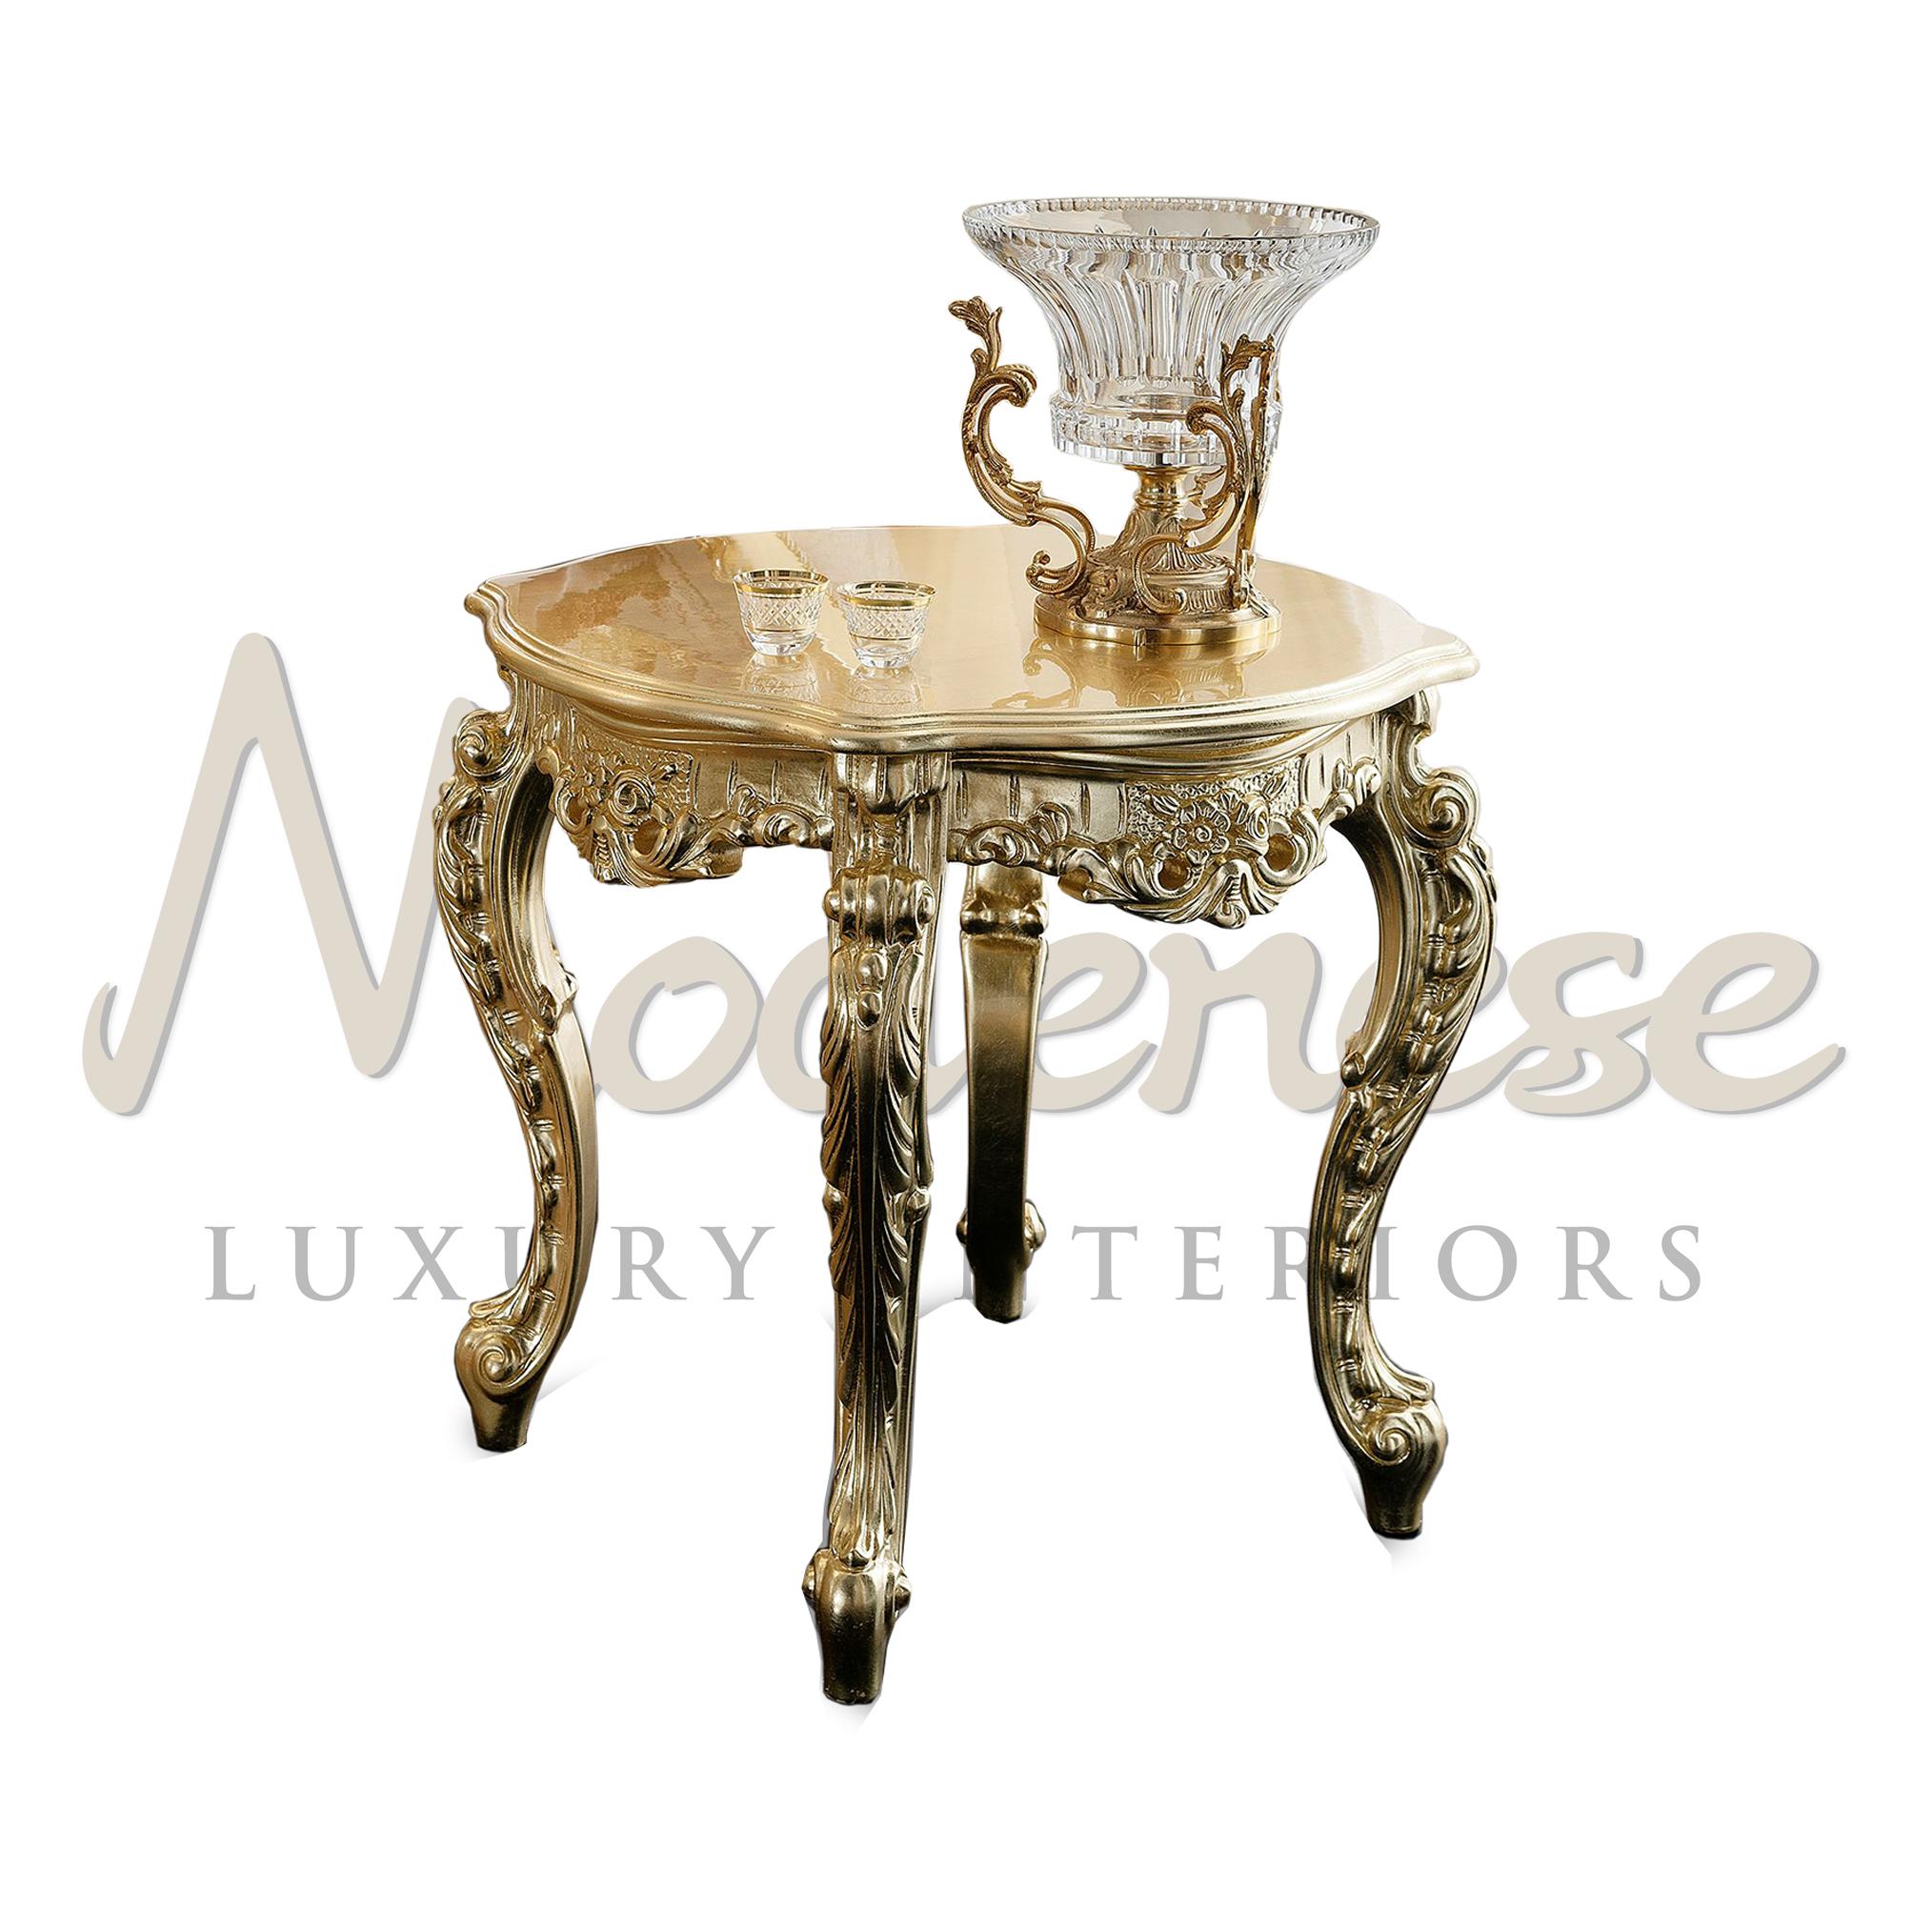 A classical italian luxury side table, ideal in mesmerizing sets of pure gold-leaf patinated furnishing such as center and coffee tables, or more generally with gold-leaf decorated furniture. This small side table places best beside an elegant